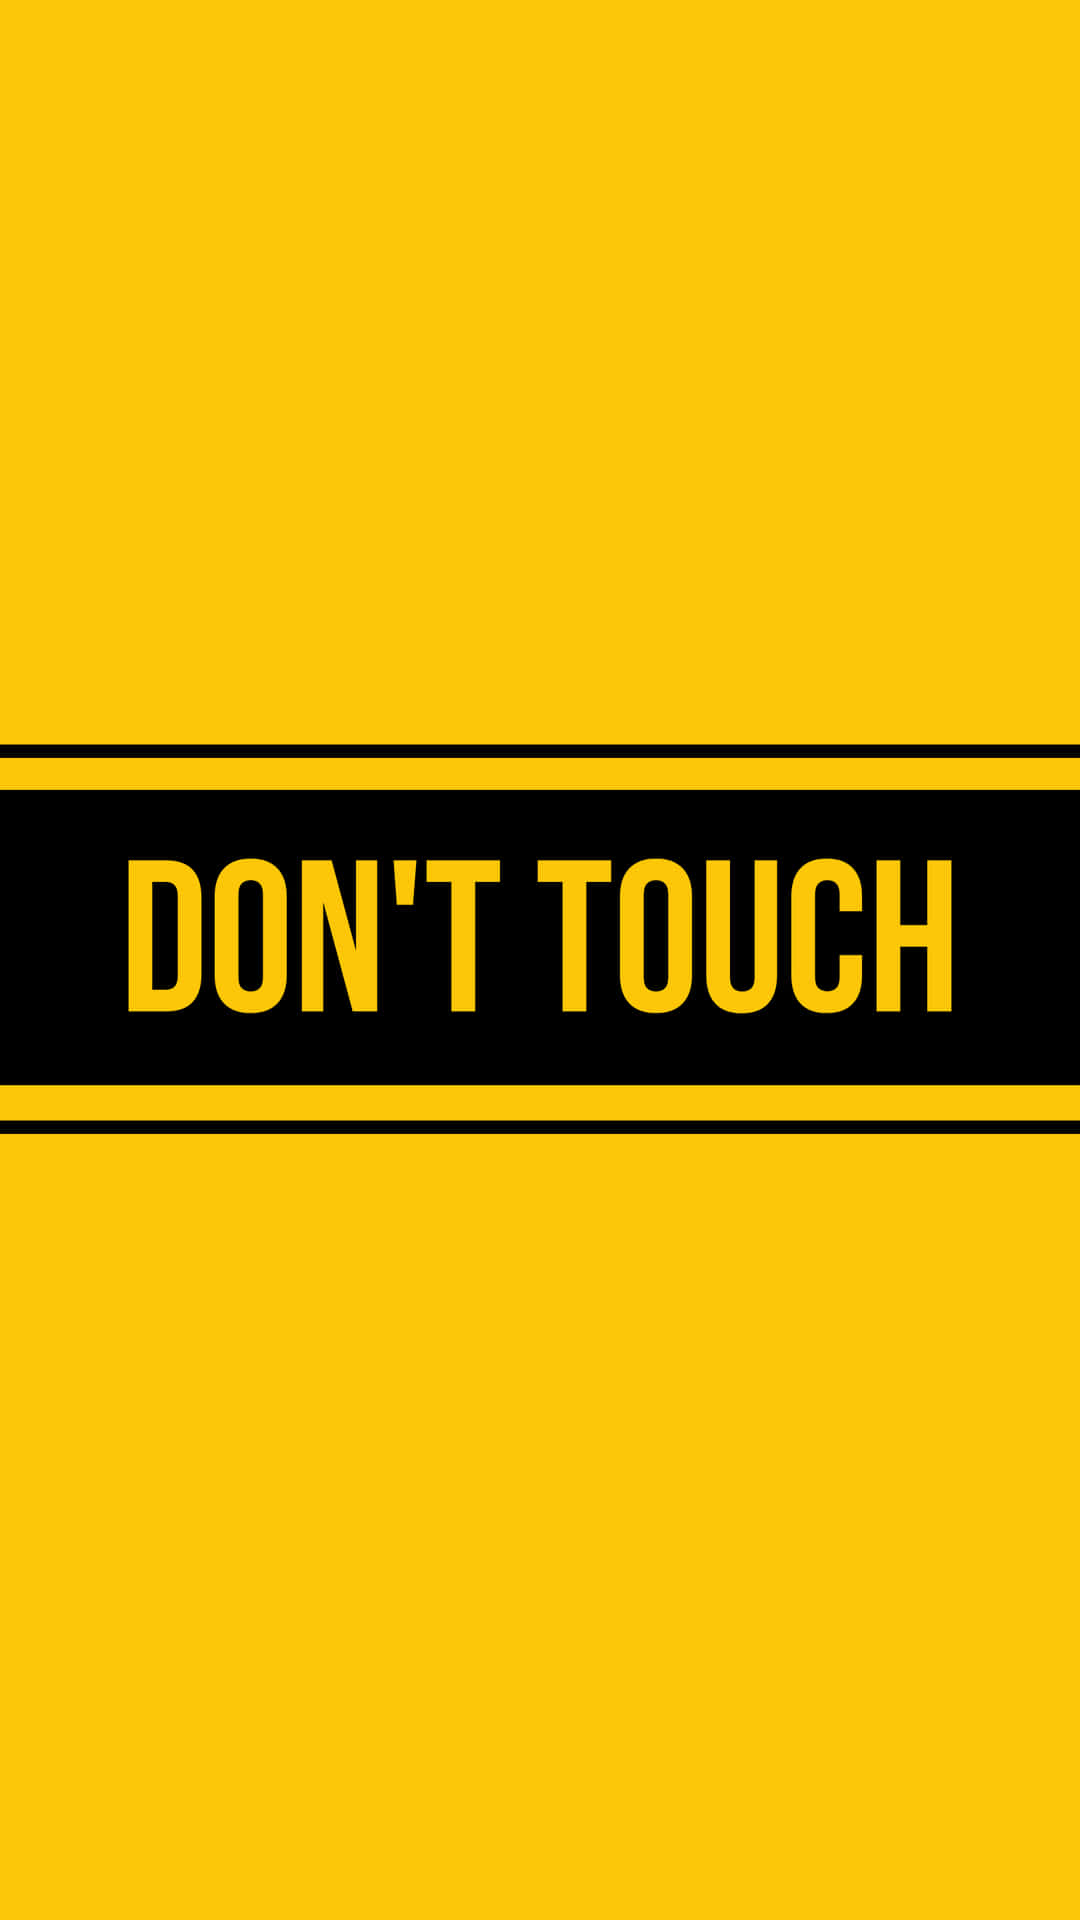 Don't Touch - A Yellow Background With A Black Stripe Background